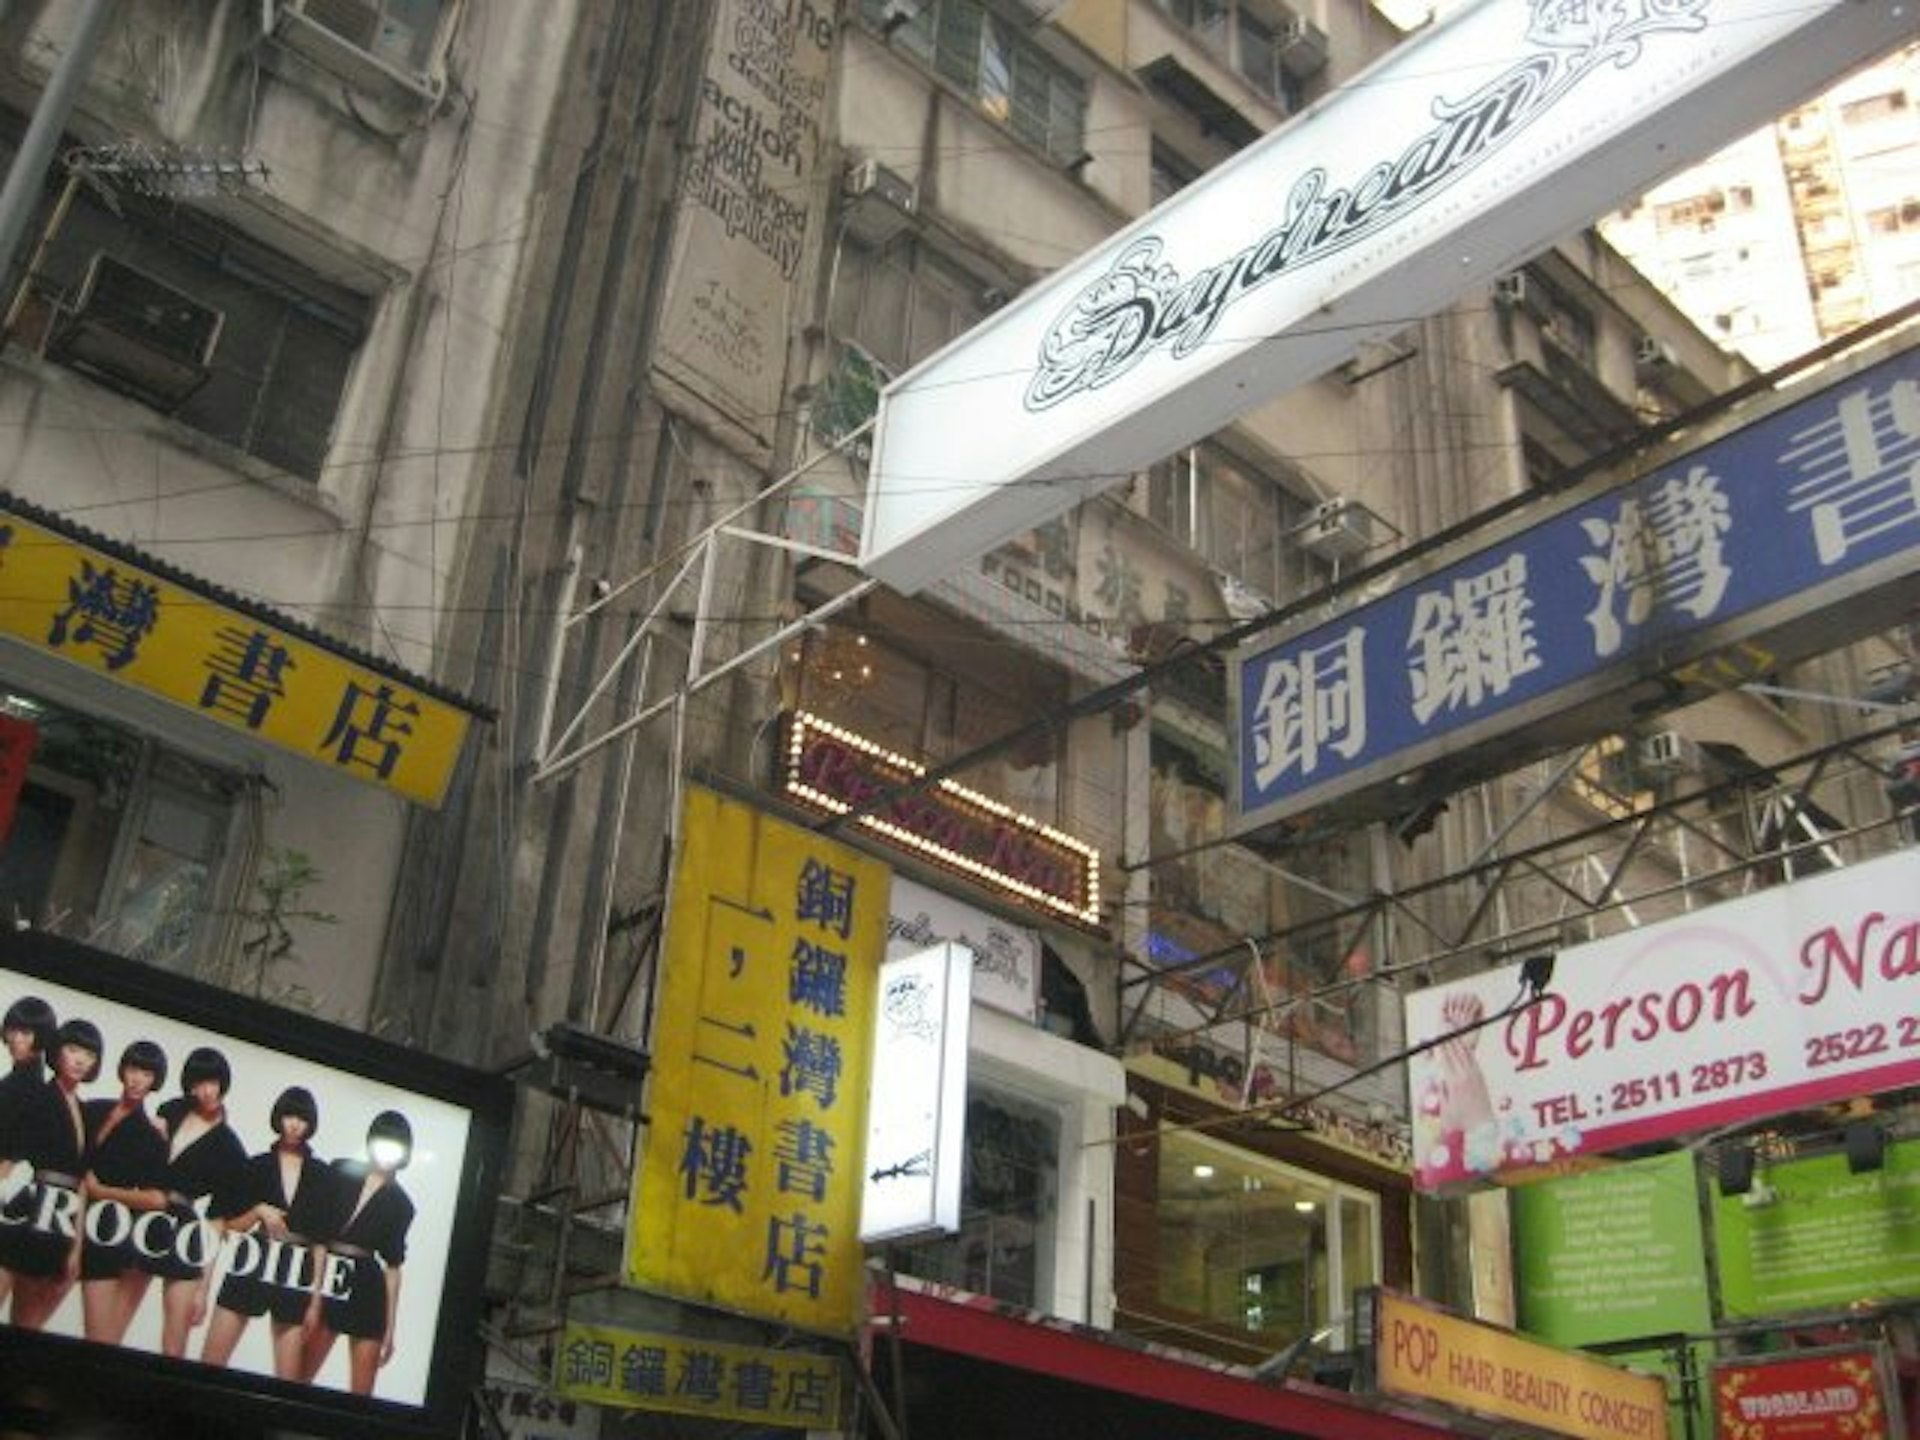 Causeway Bay Bookstore http://cwbbooks.com/pages.php?pageid=3